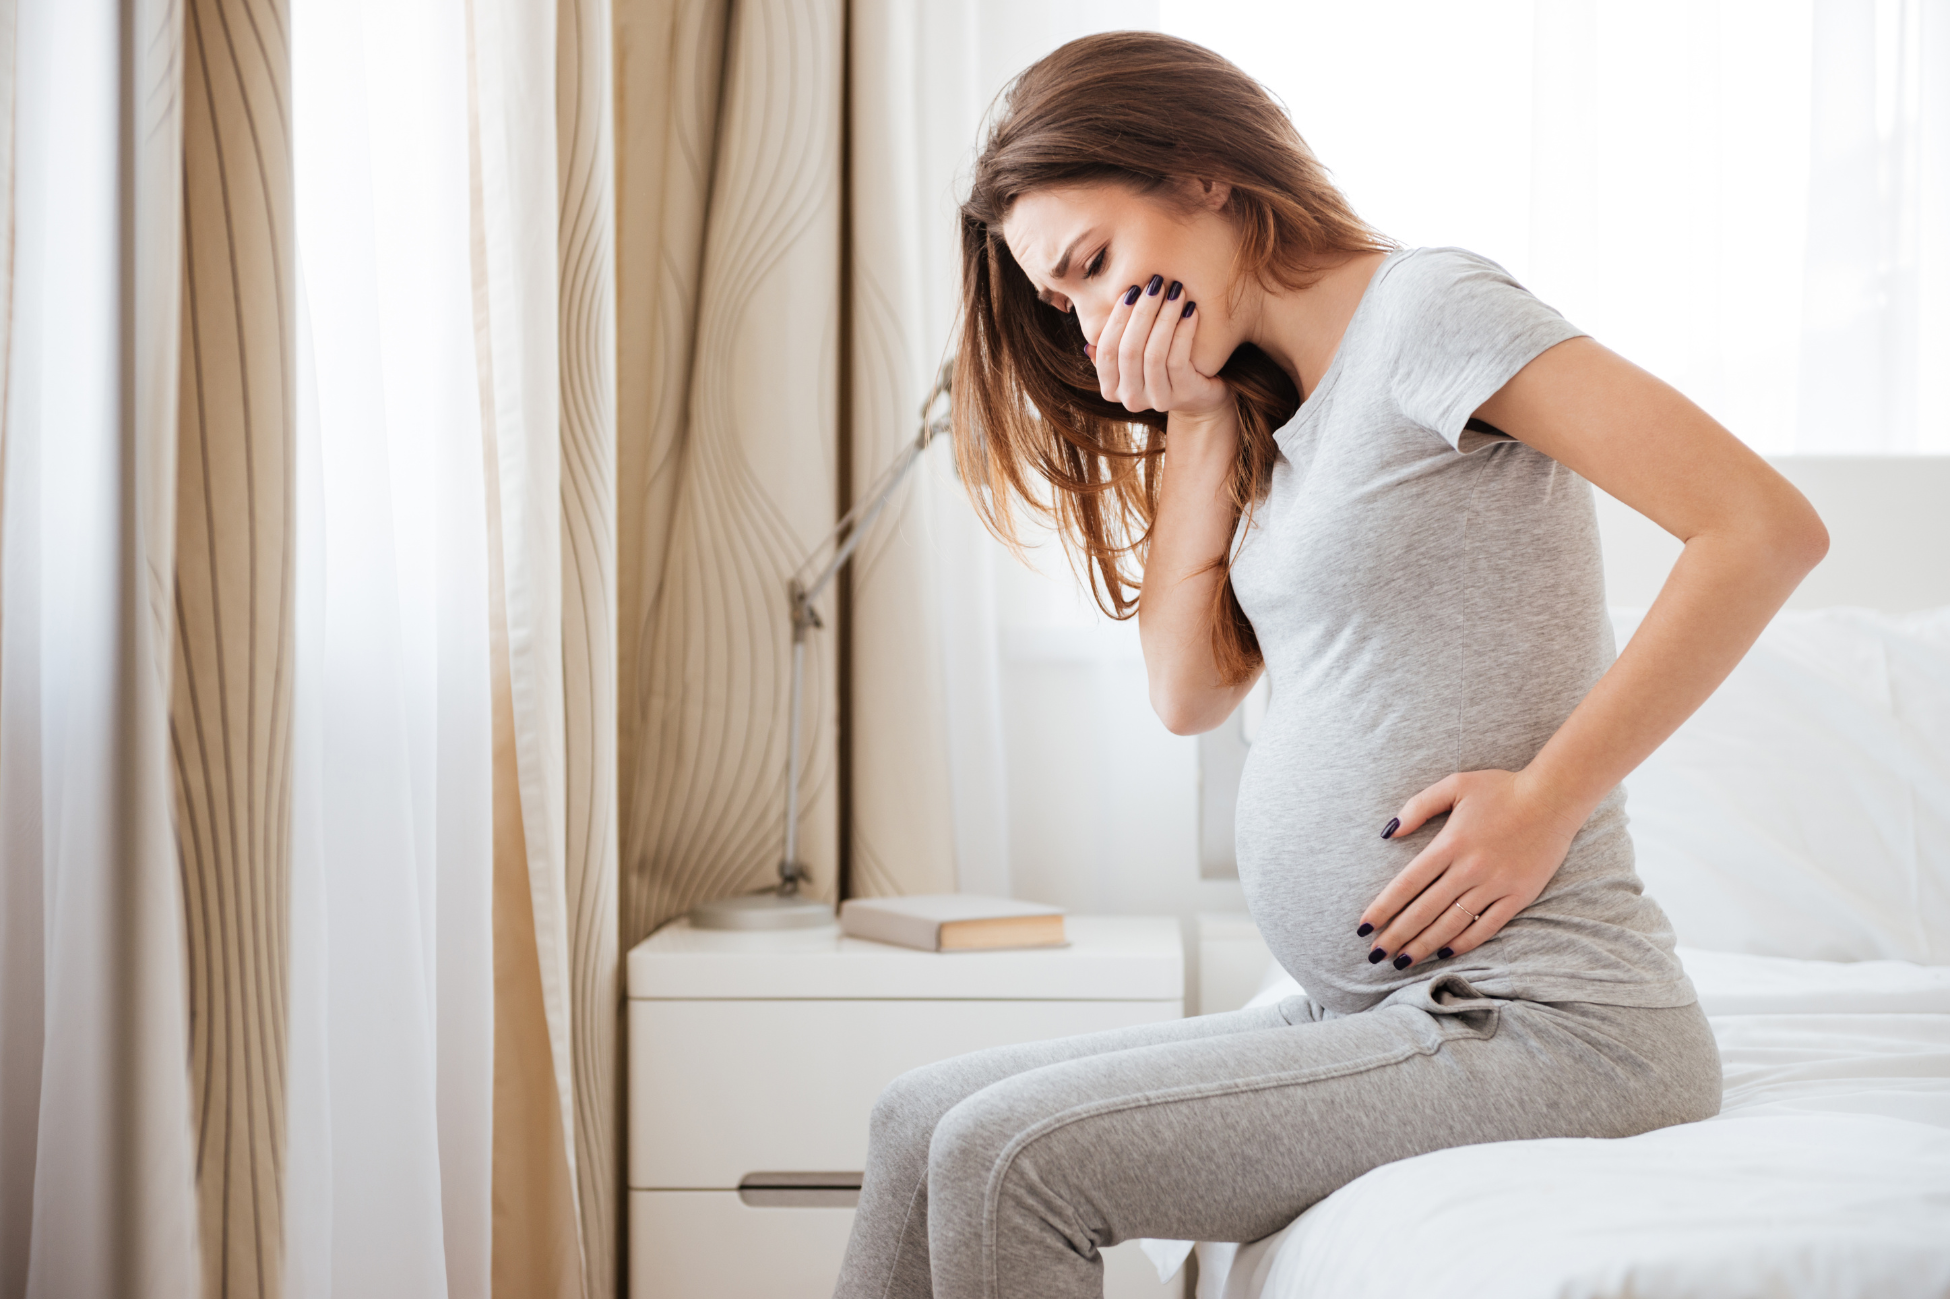 Foods That Fight Nausea During Pregnancy